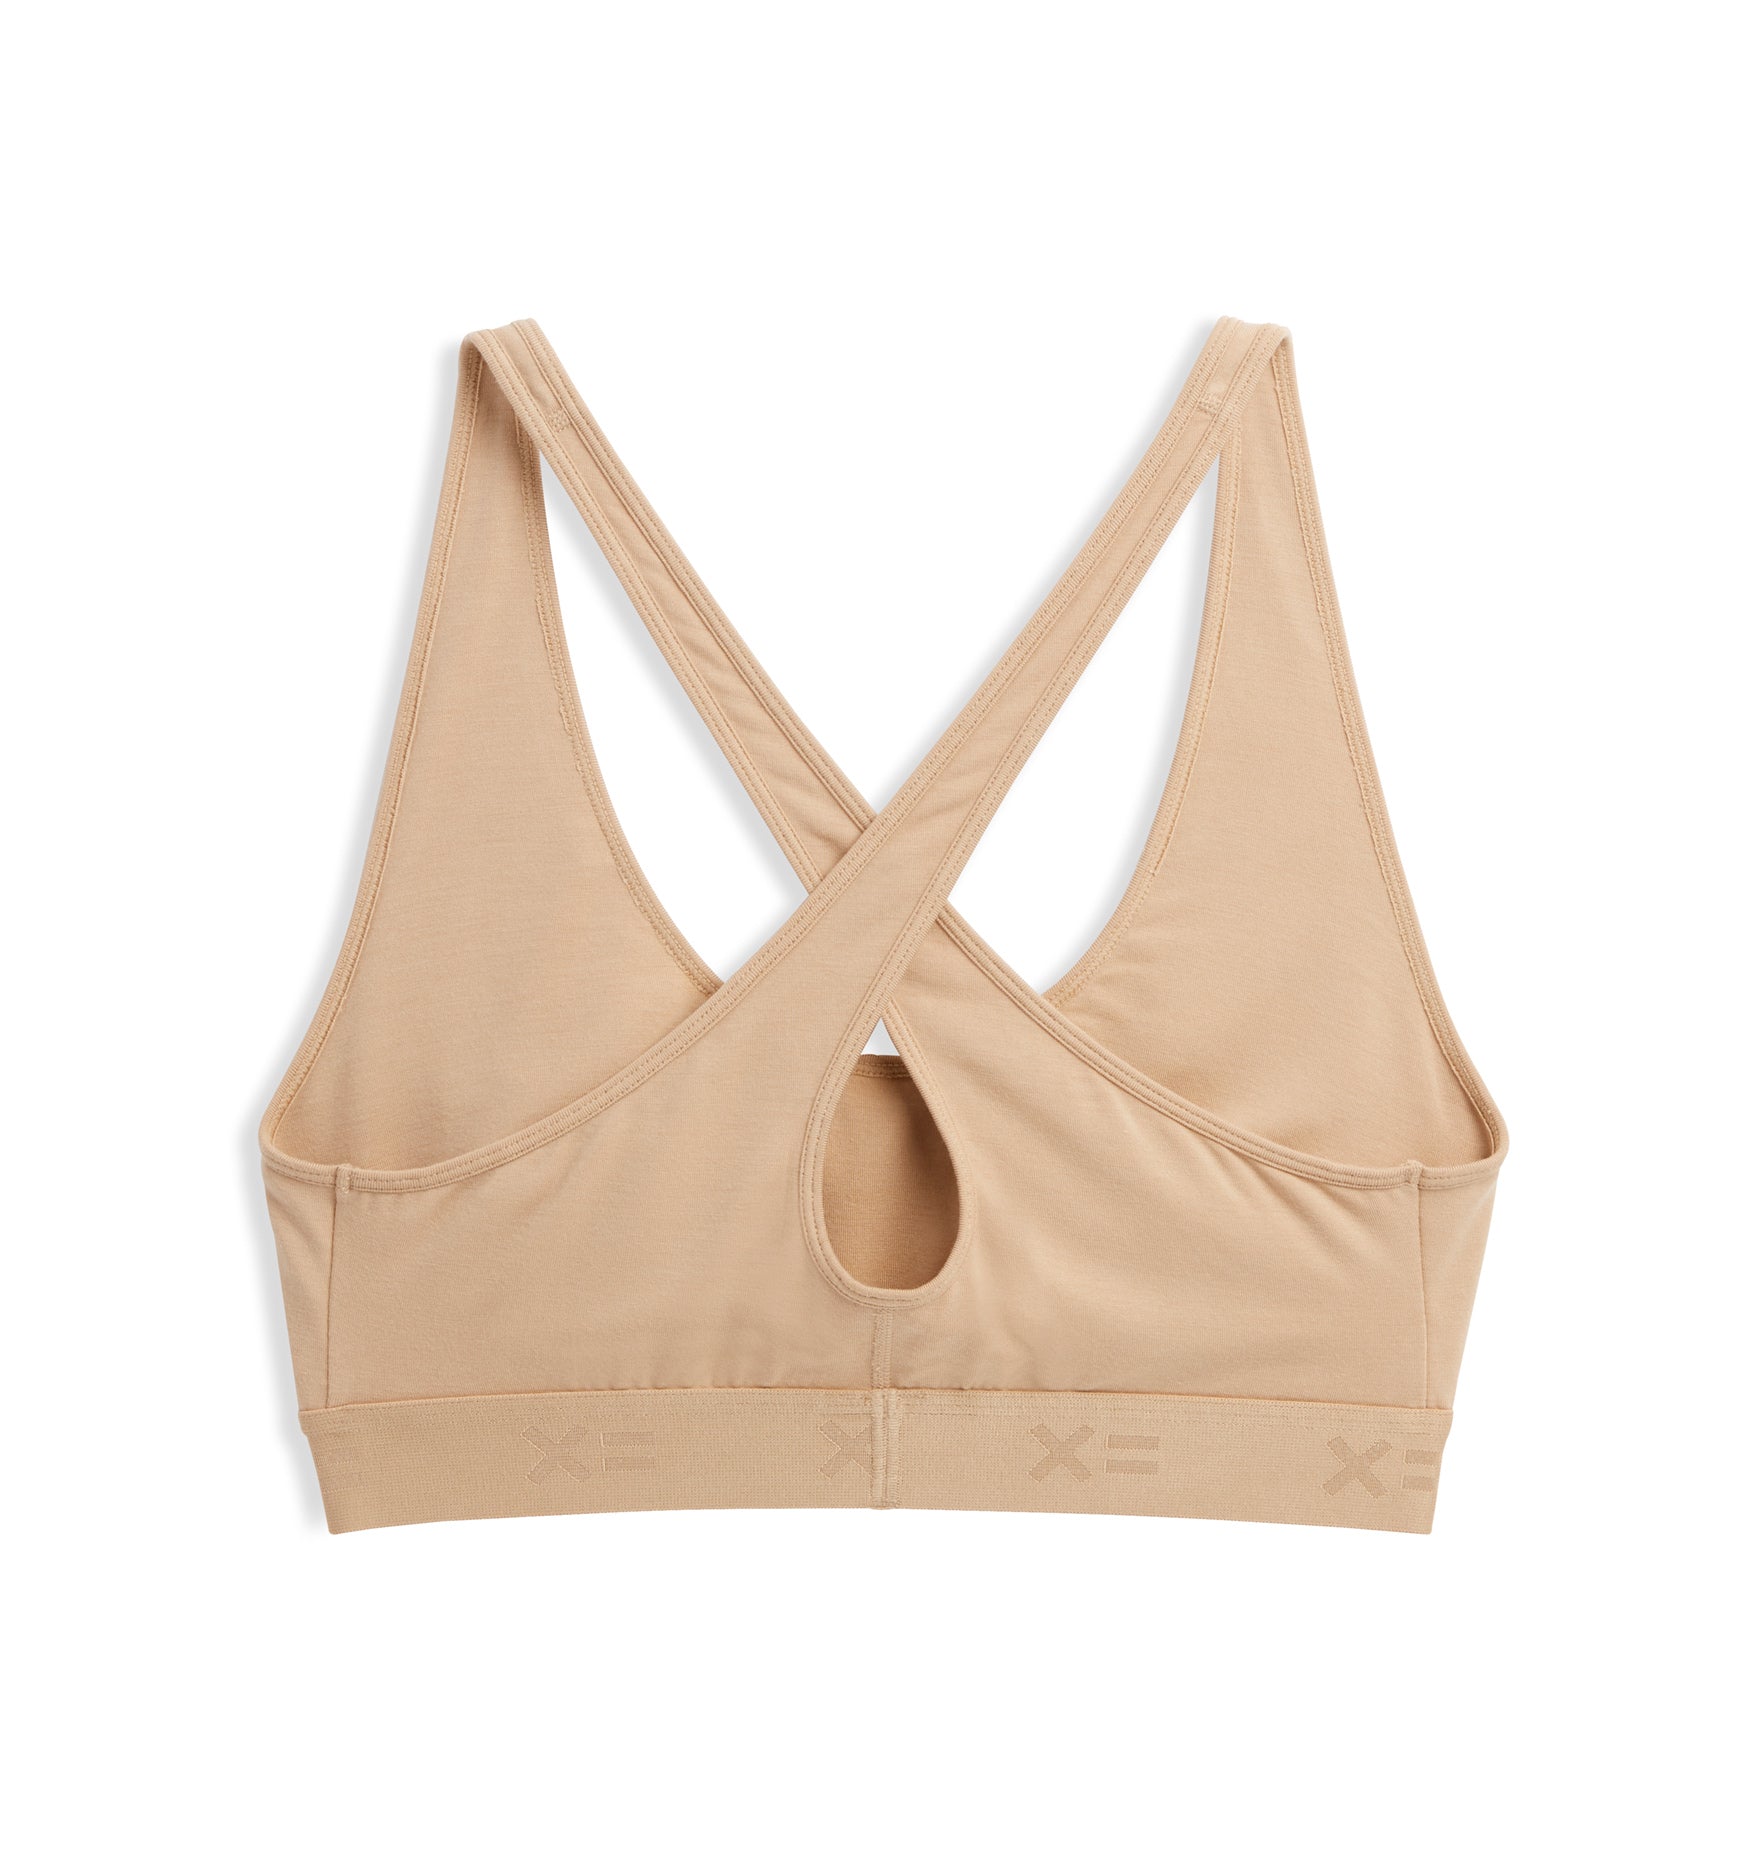 TomboyX Straight Up Soft Bra, Cotton Square-Neck Bralette for